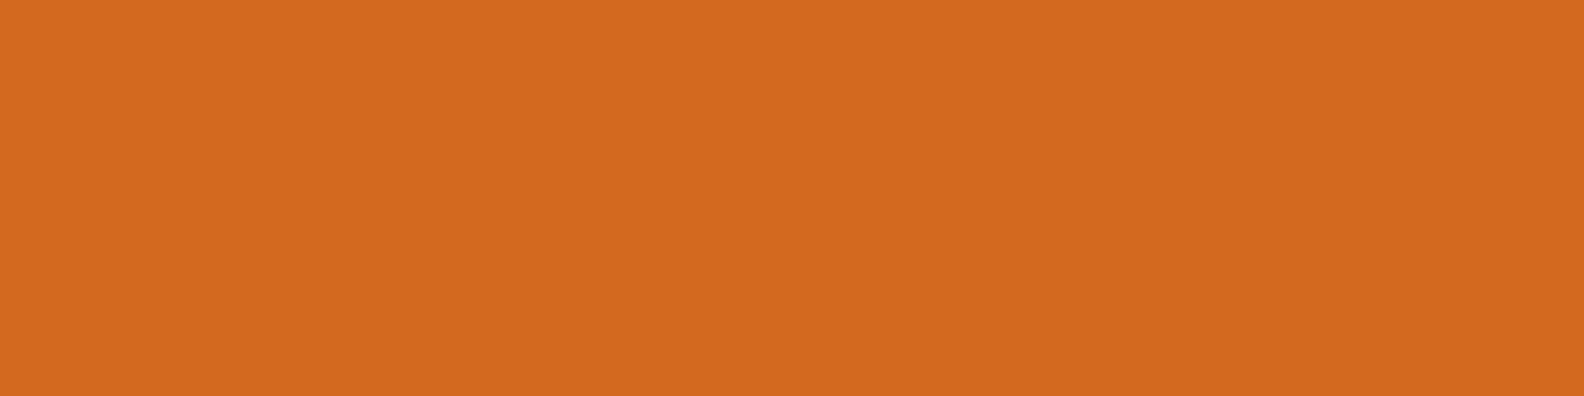 1584x396 Cocoa Brown Solid Color Background